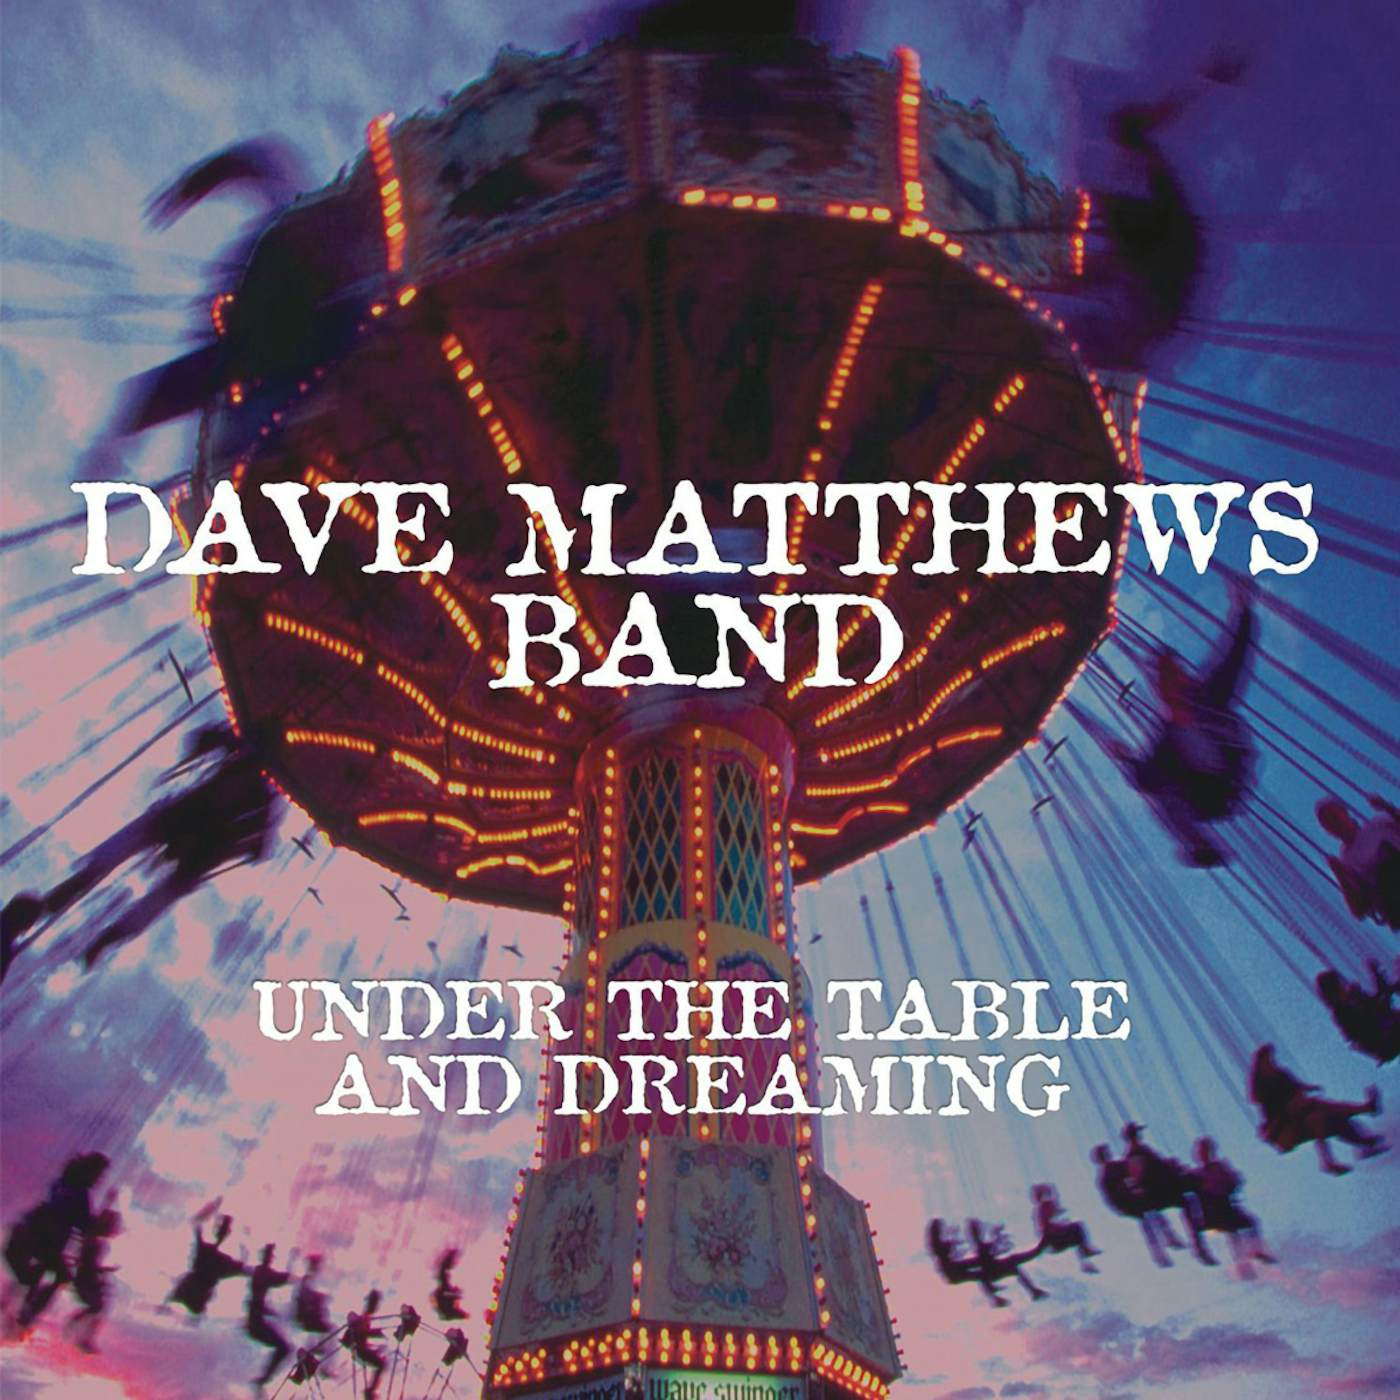 Dave Matthews Band Under The Table And Dreaming 2-LP Vinyl